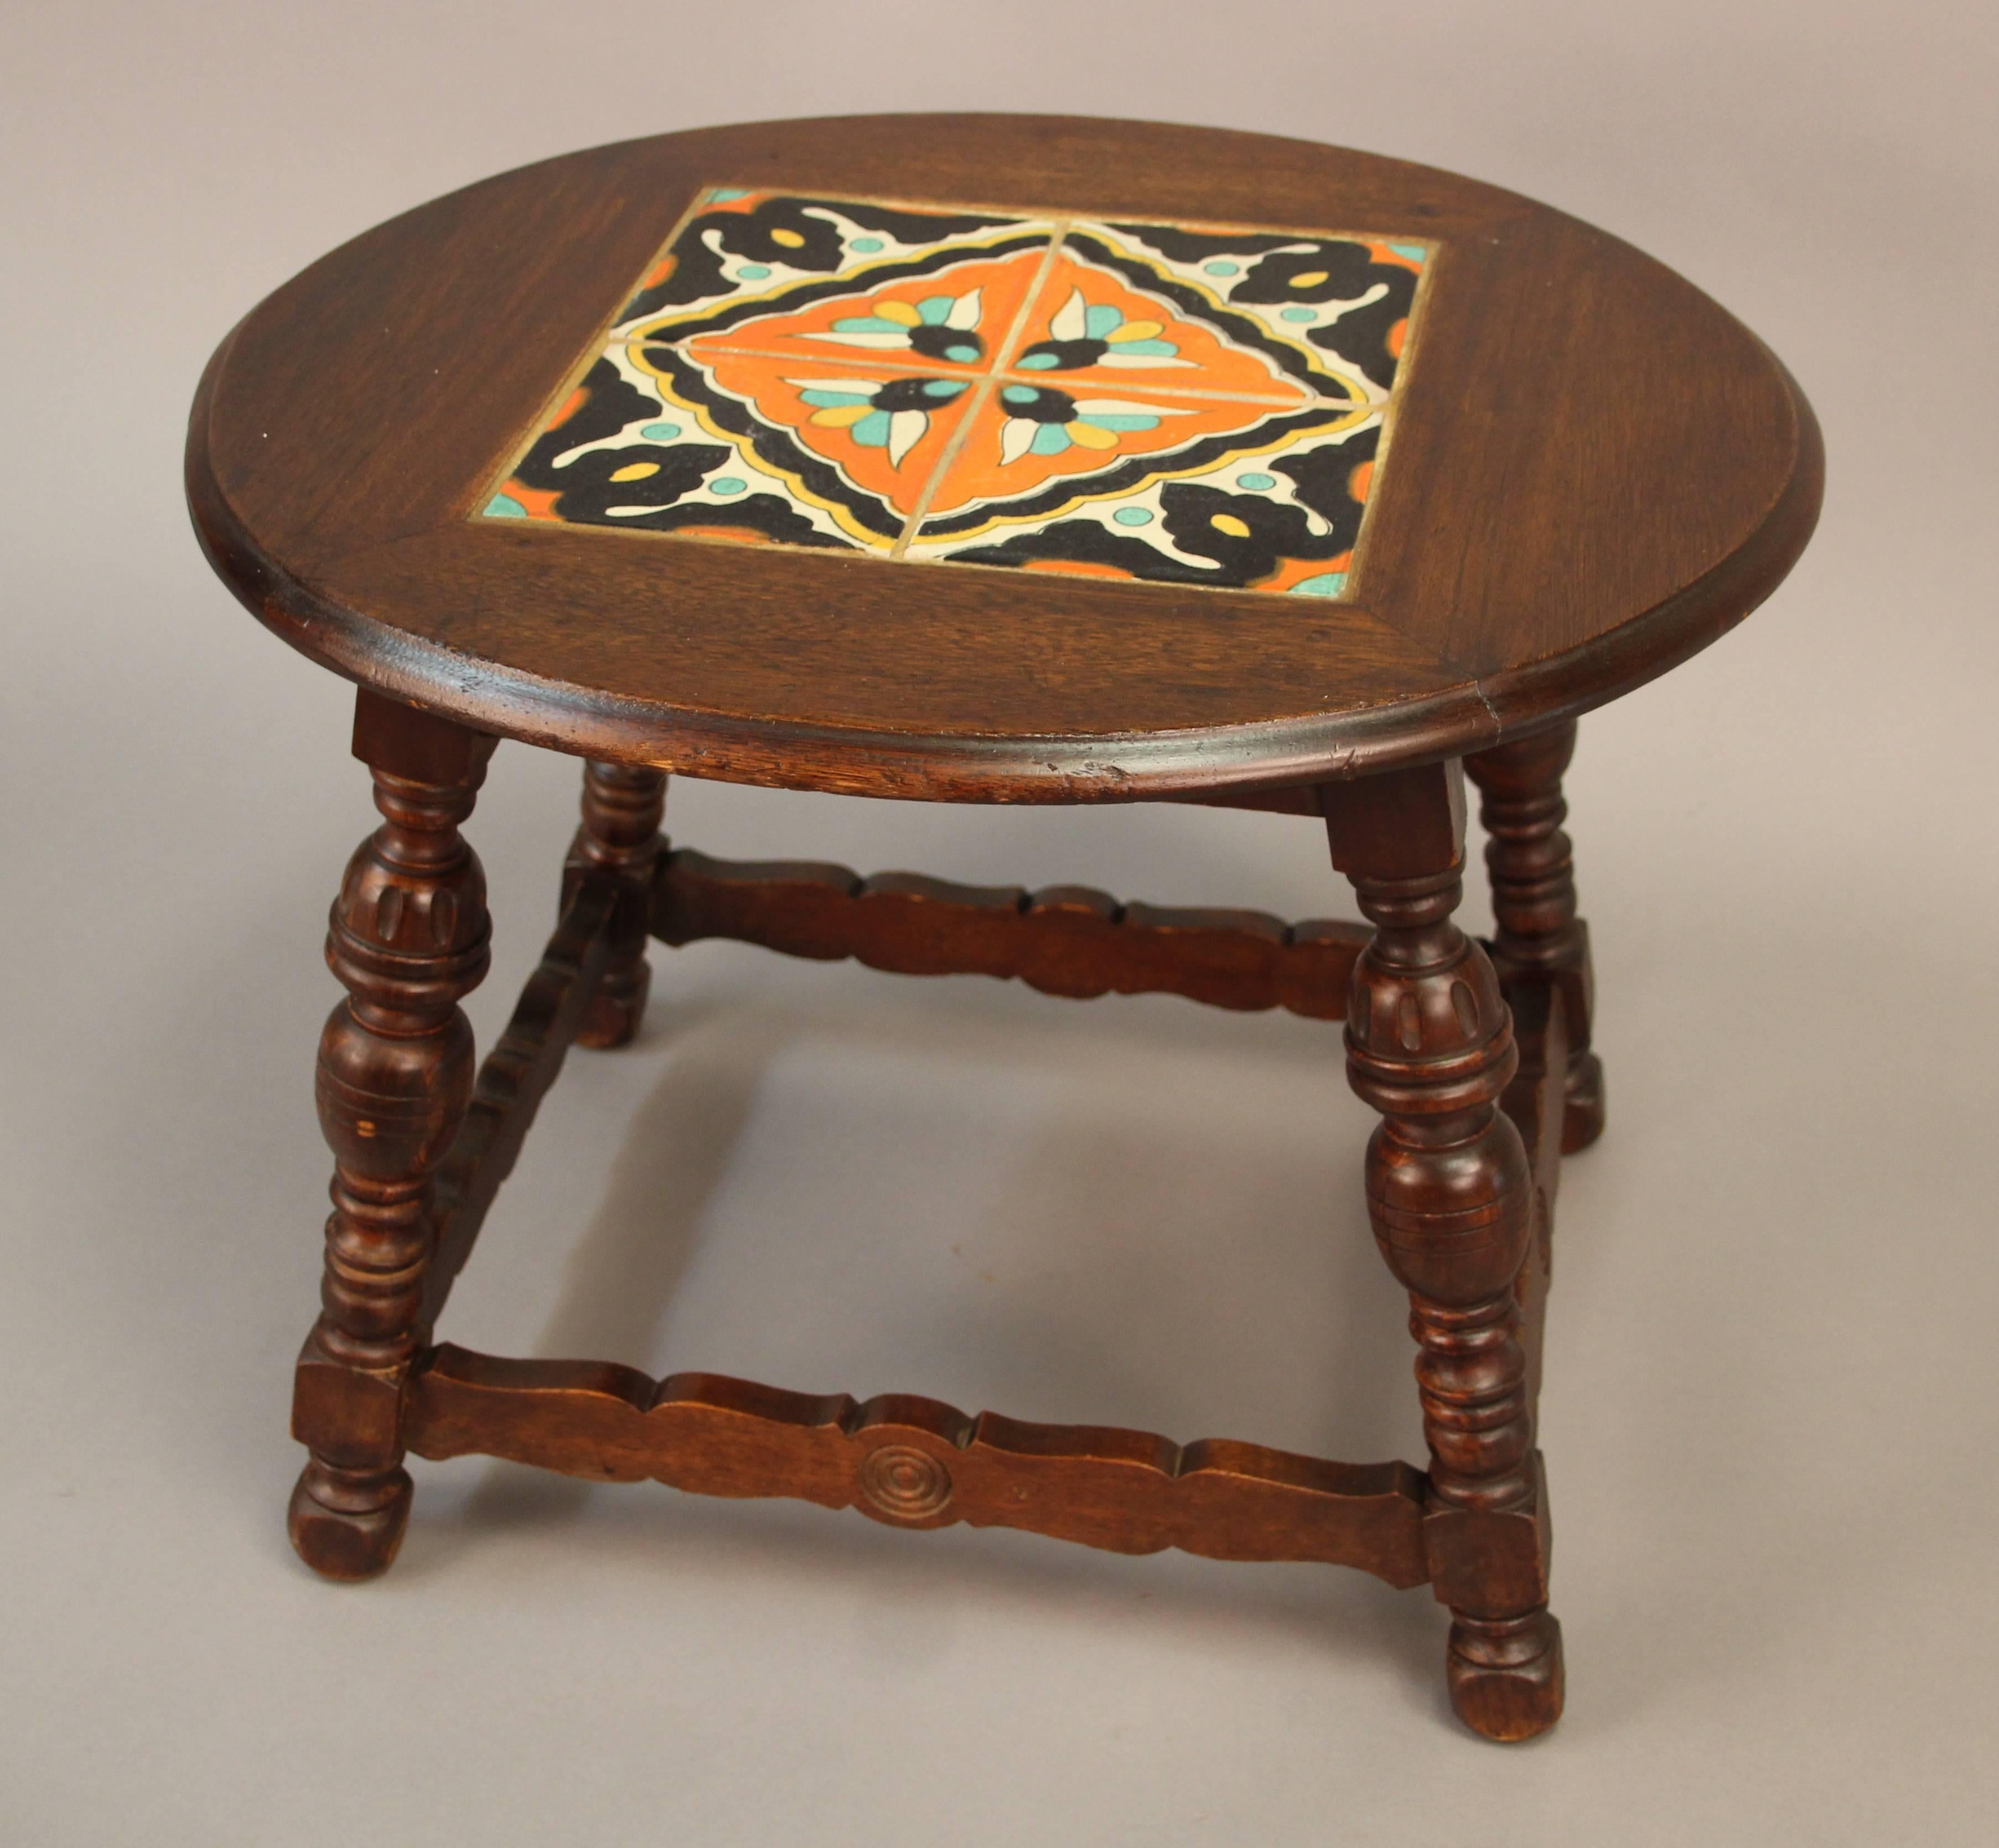 American Round California Tile Table with Four Tiles